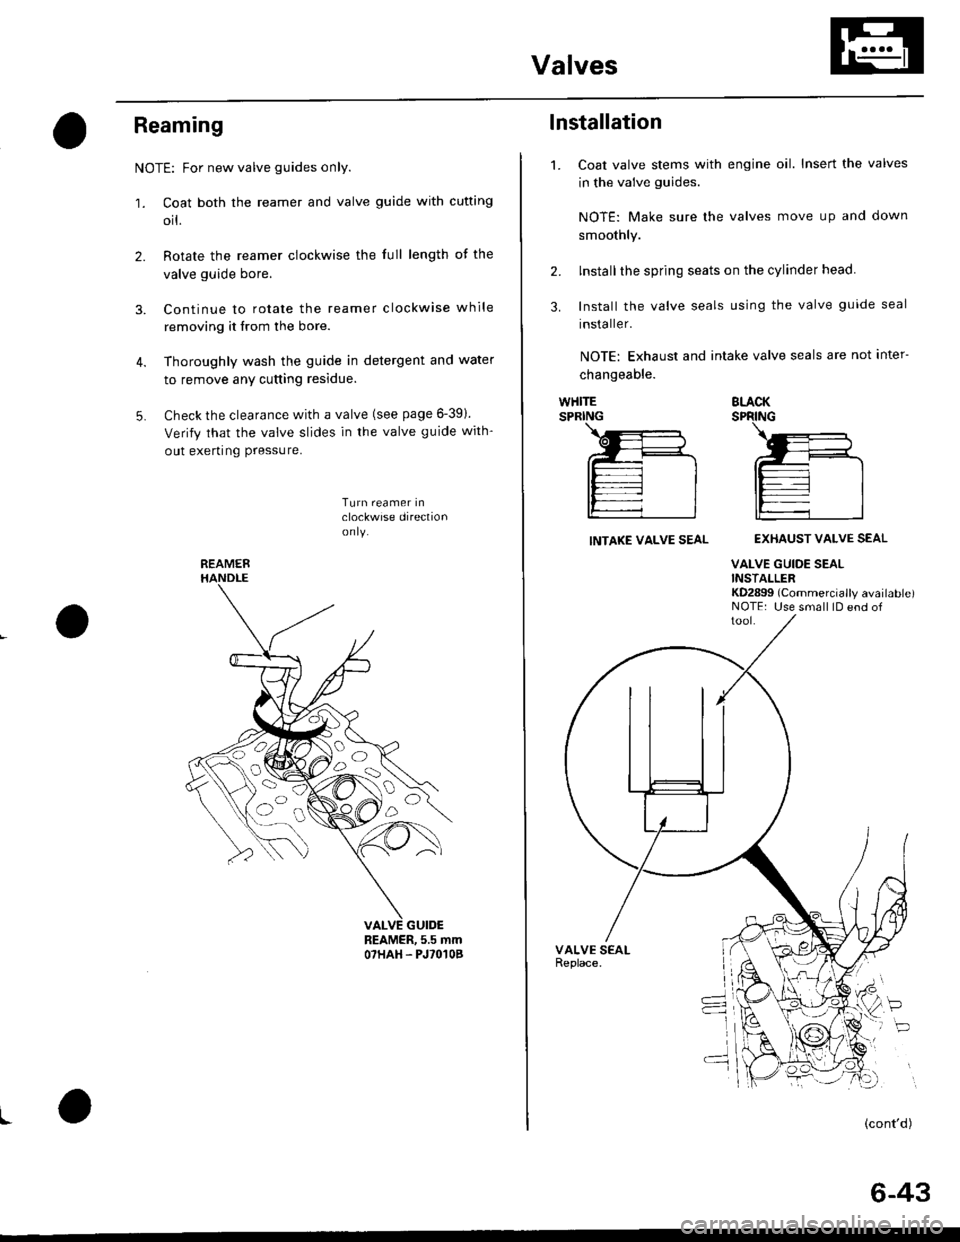 HONDA CIVIC 1996 6.G Workshop Manual Valves
Reaming
NOTE: For new valve guides only.
1. Coat both the reamer and valve guide with cufting
orl.
2. Rotate the reamer clockwise the full length of the
valve guide bore.
3. Continue to rotate 